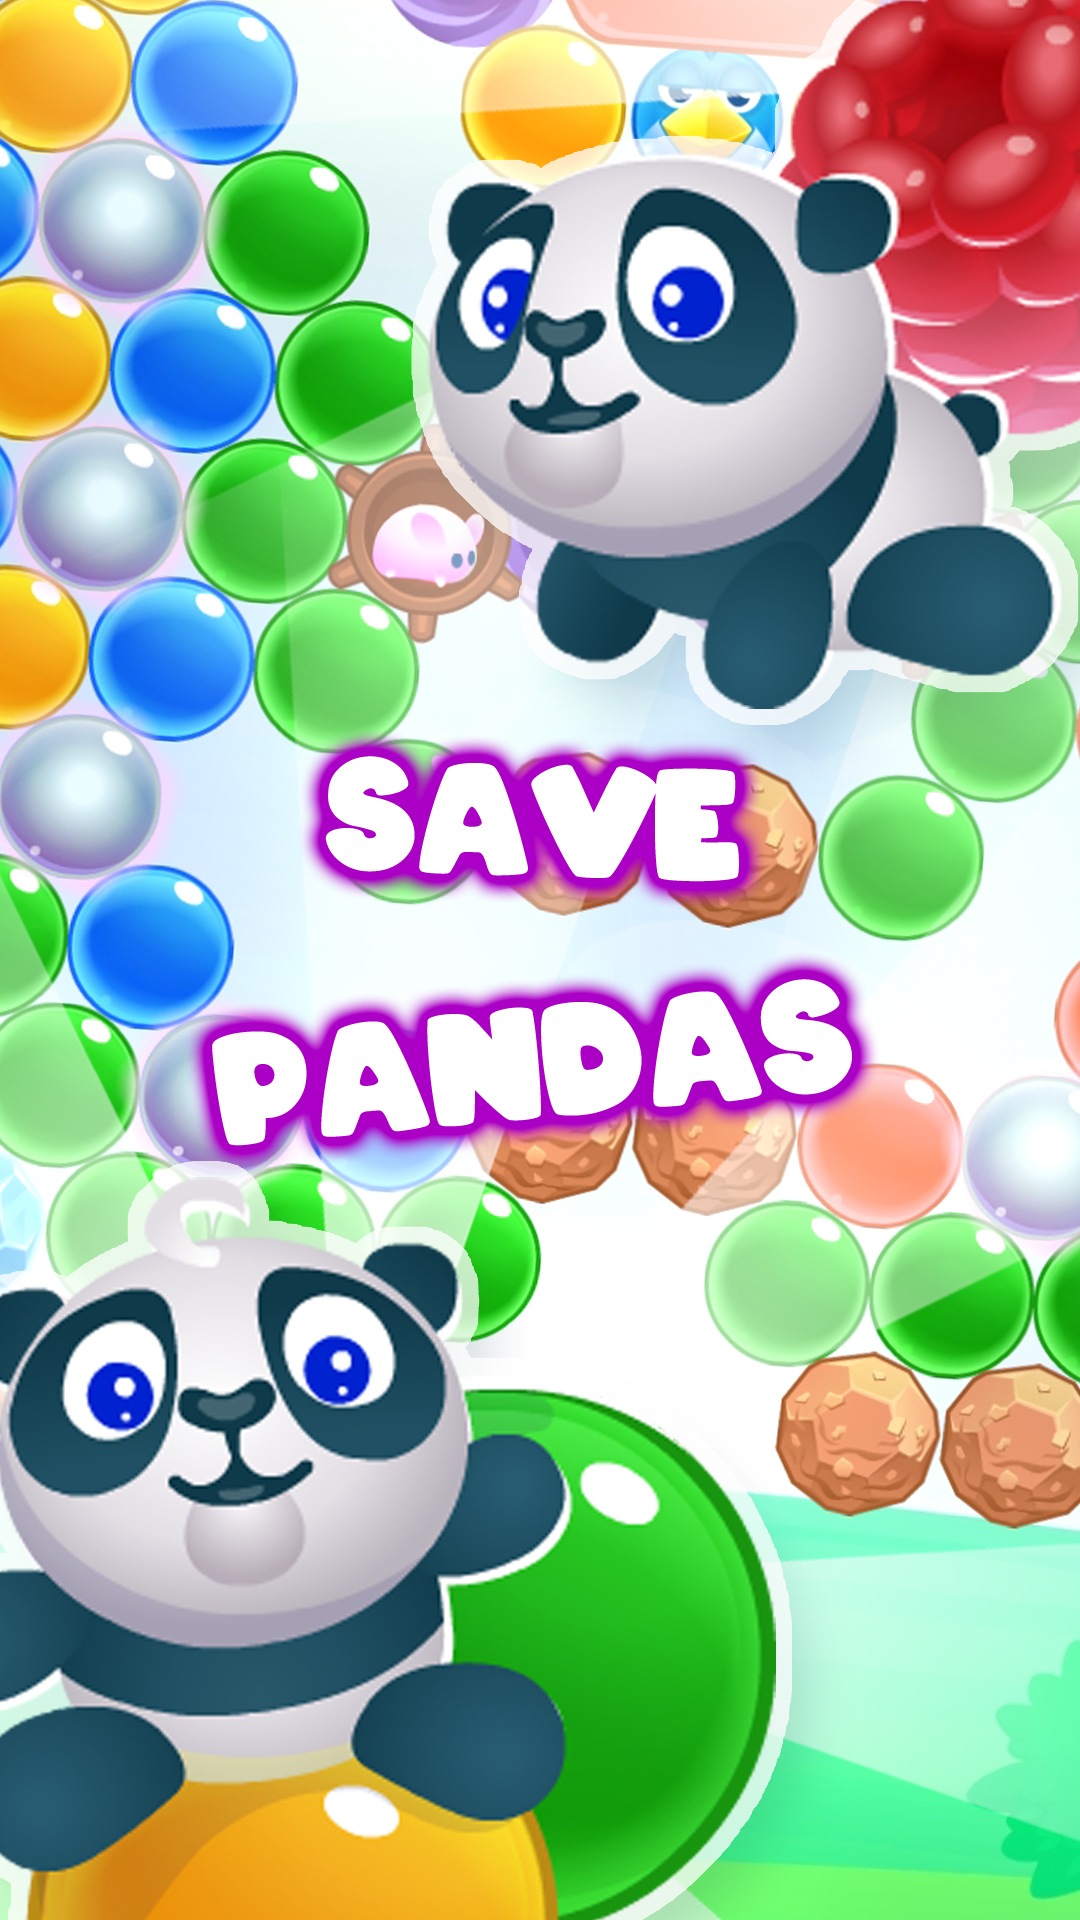 PANDA: BUBBLE SHOOTER - Play Online for Free!